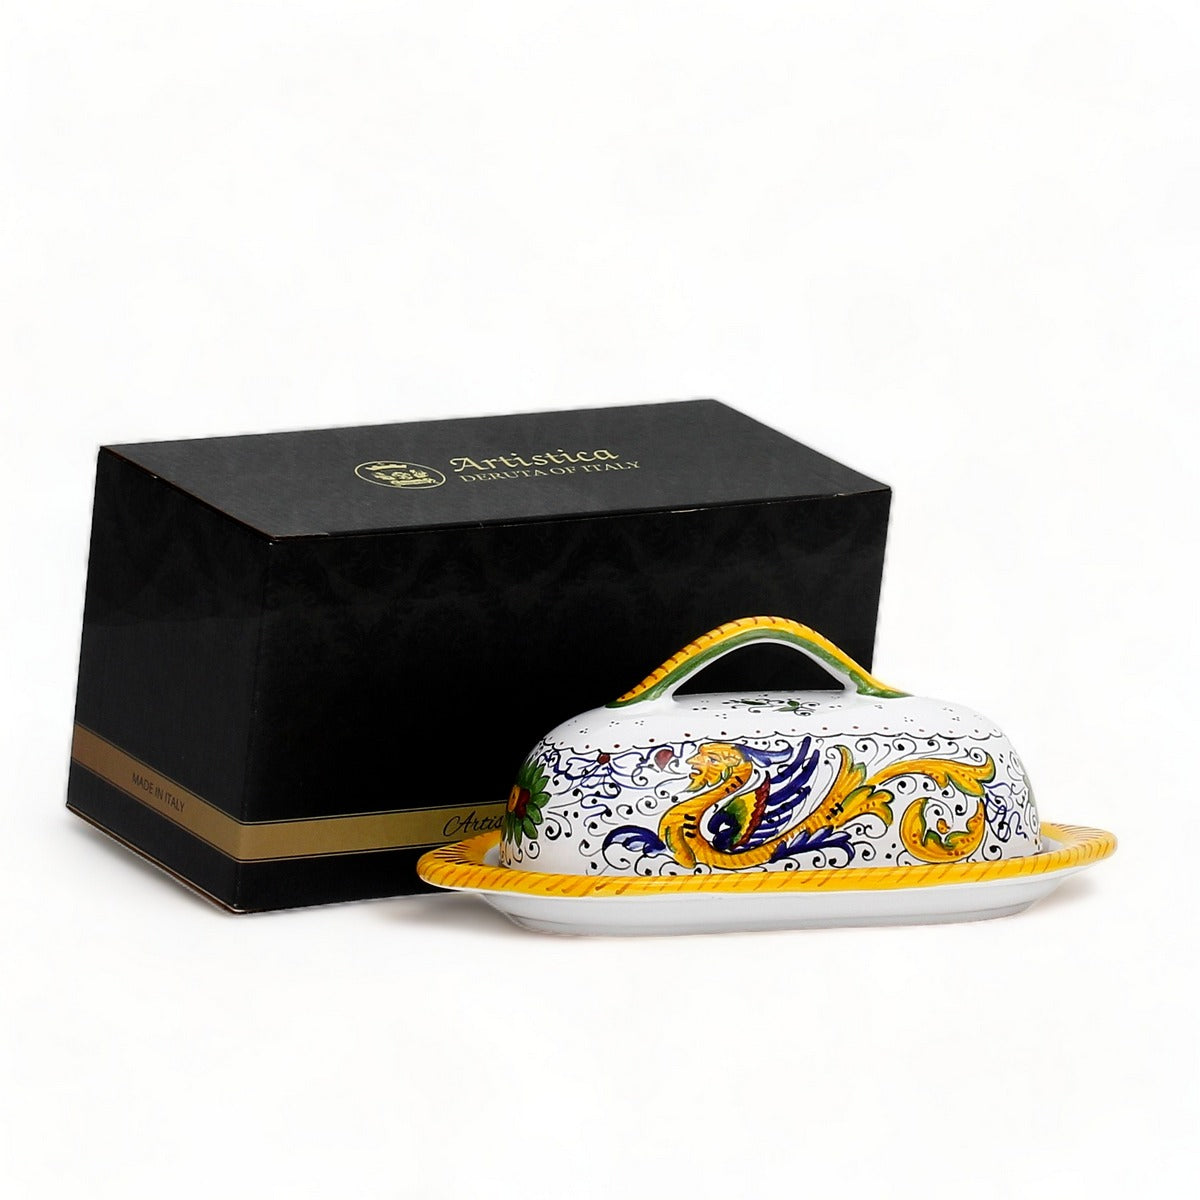 GIFT BOX: With authentic Deruta hand painted ceramic - Butter Dish with cover Raffaellesco Design